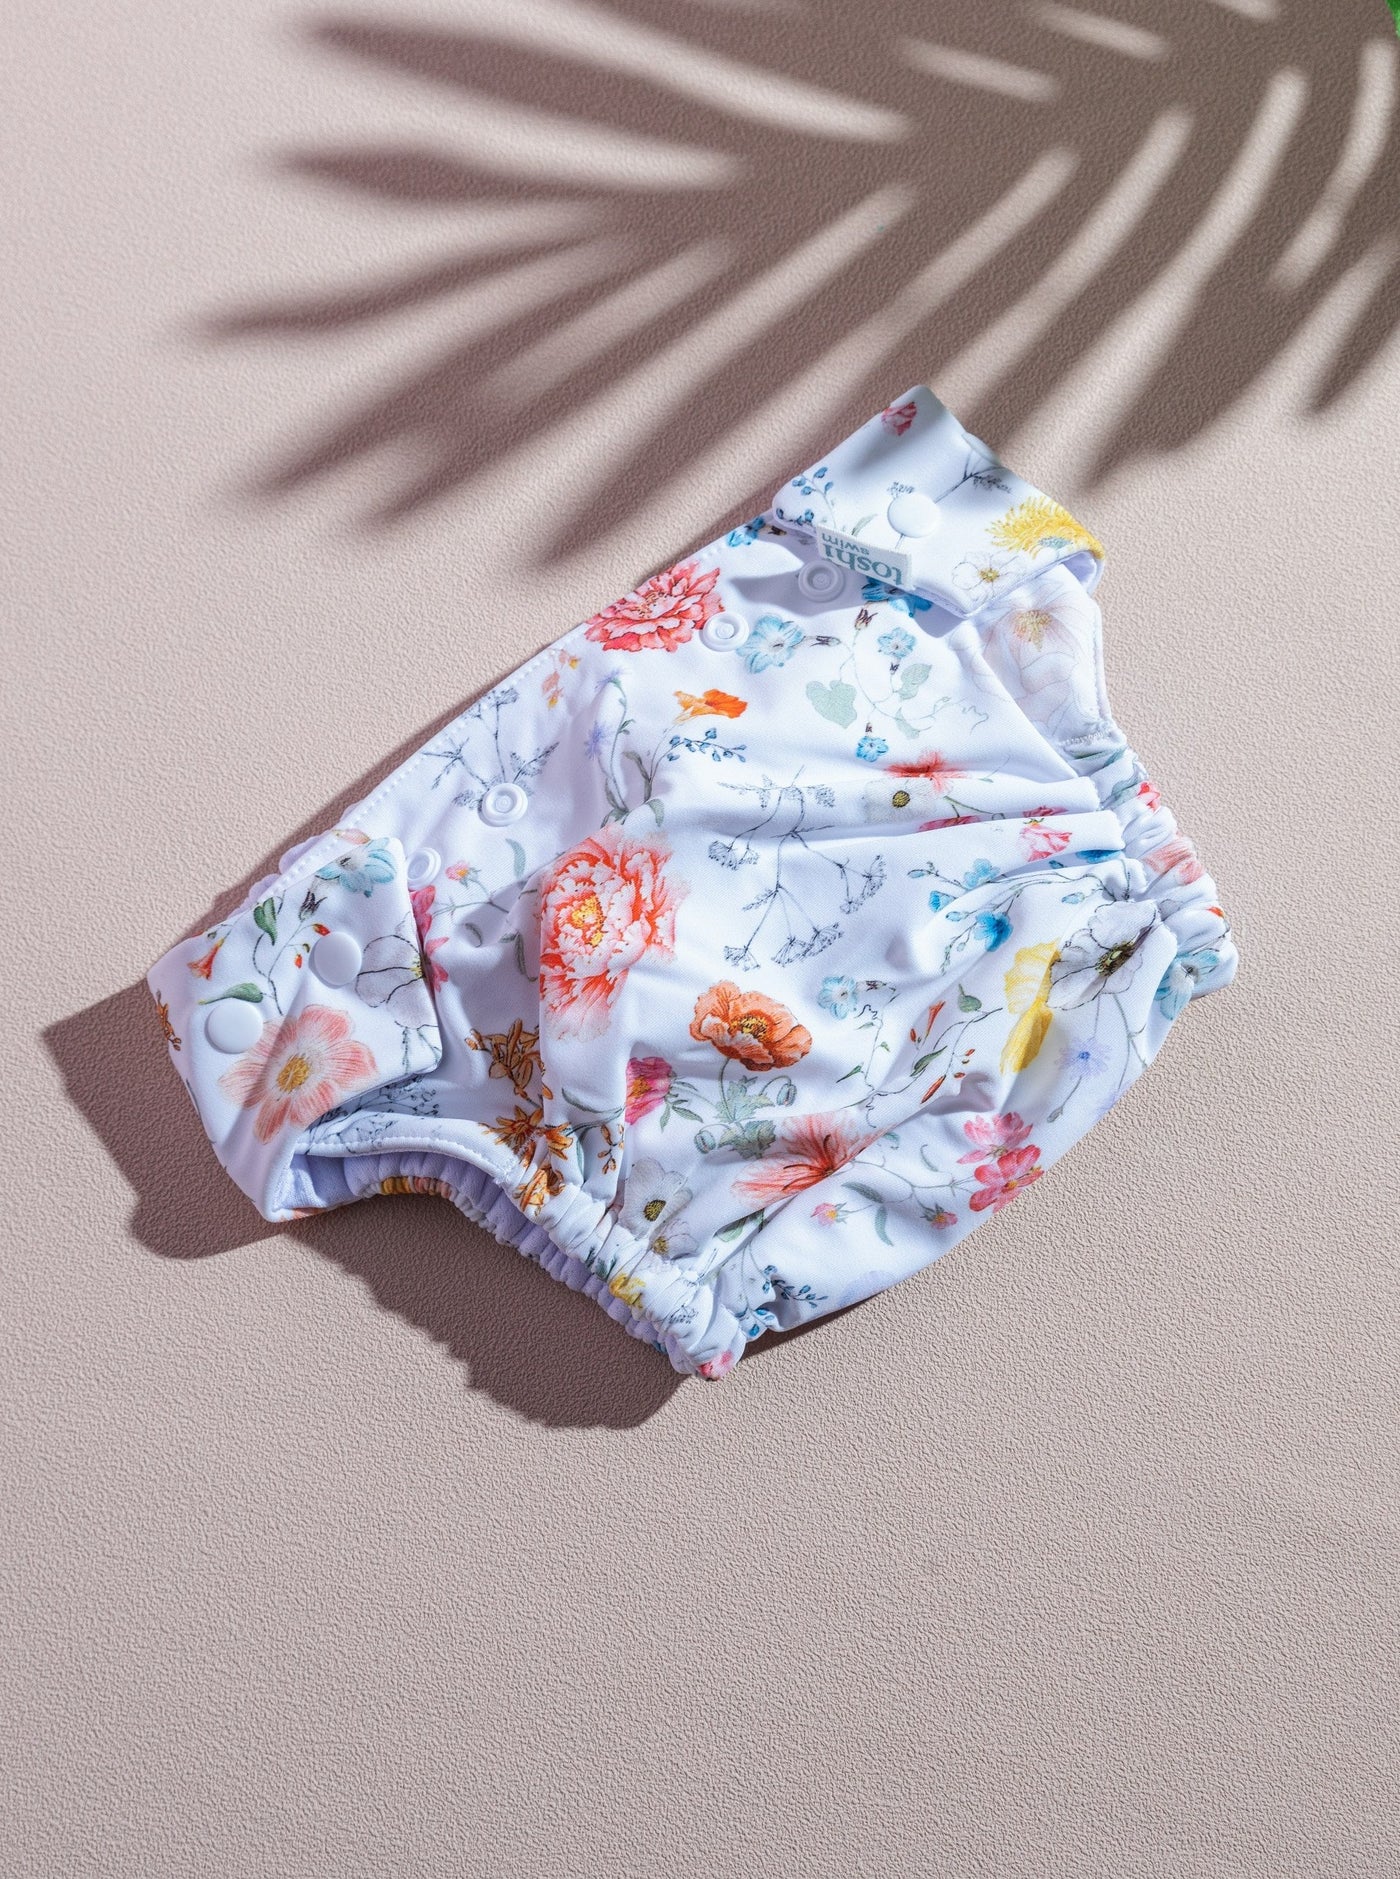 toshi baby rash guard and swim diapers in white floral prints